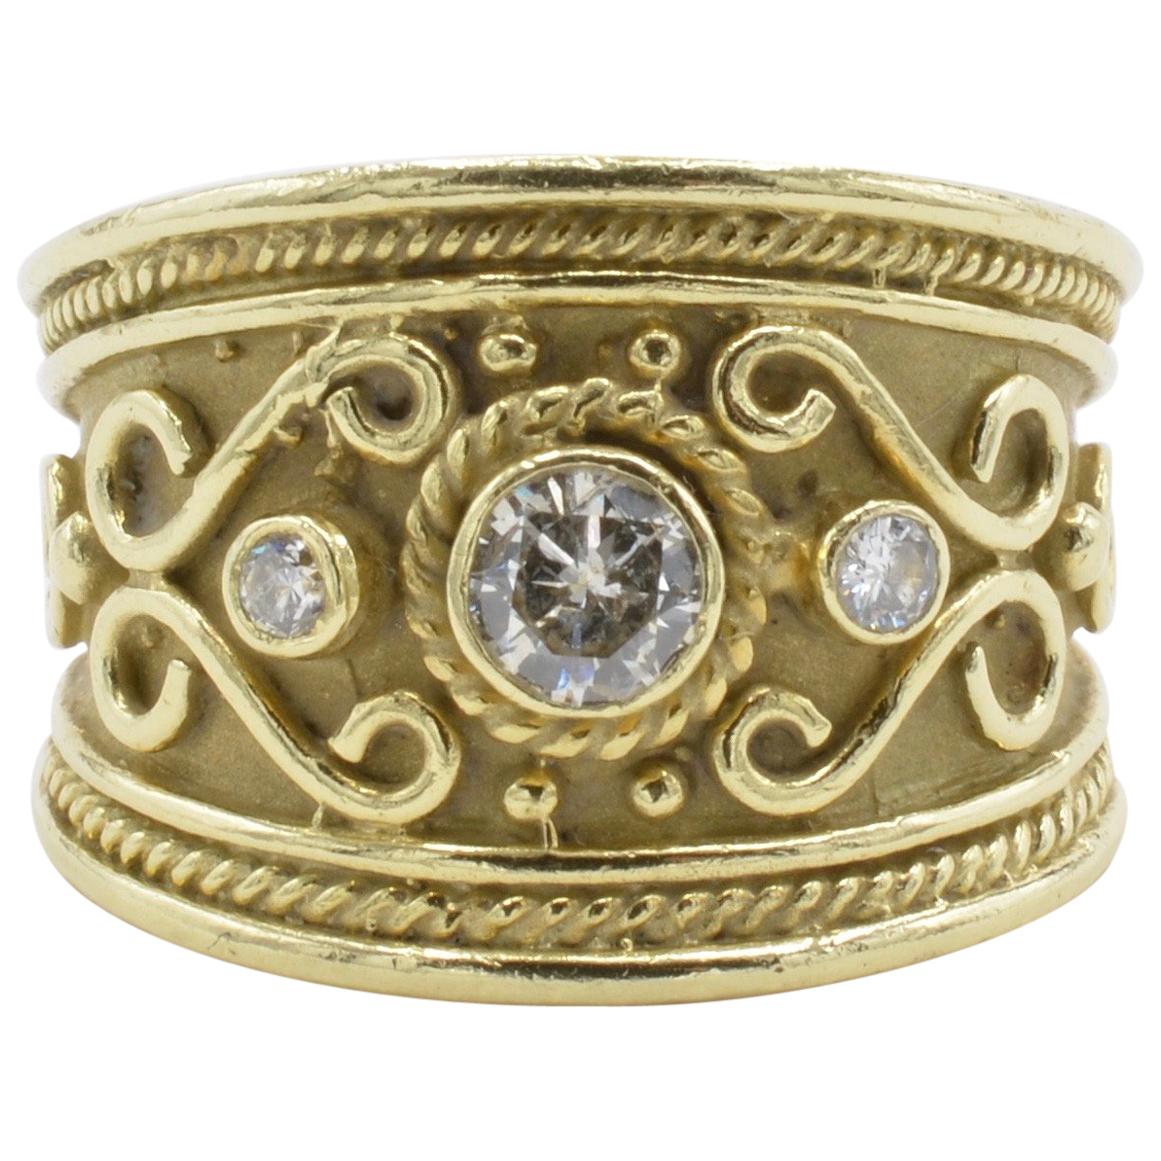 Etruscan Wide Yellow Gold Band Ring with Diamonds and Spirals